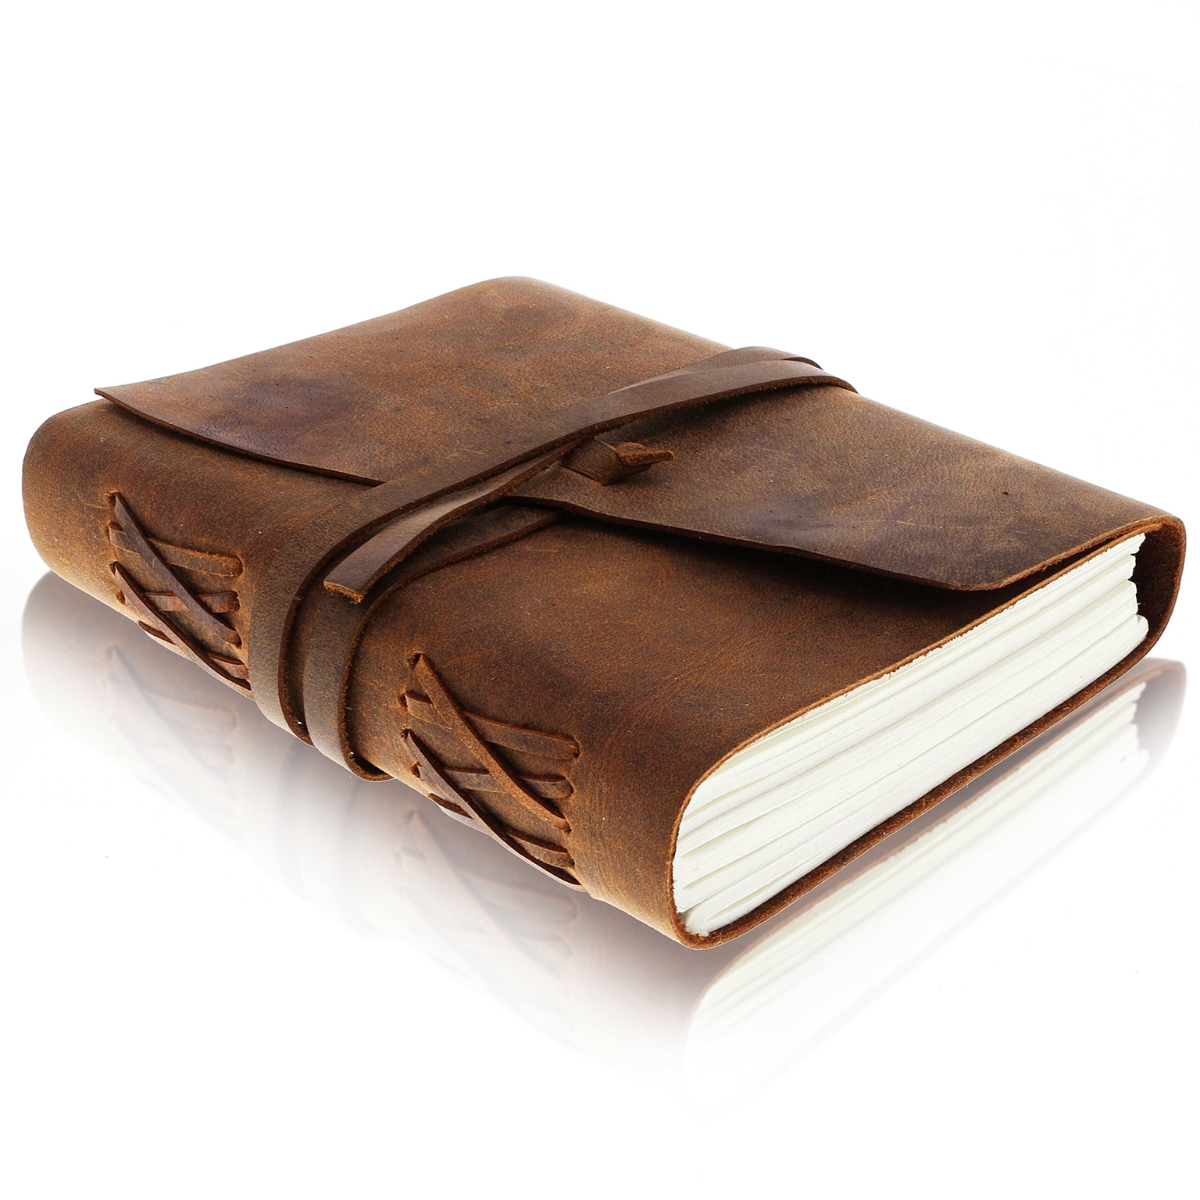 11. Timeless Elegance: Personalized Leather Bound Journal - The Perfect Anniversary Gift for Him